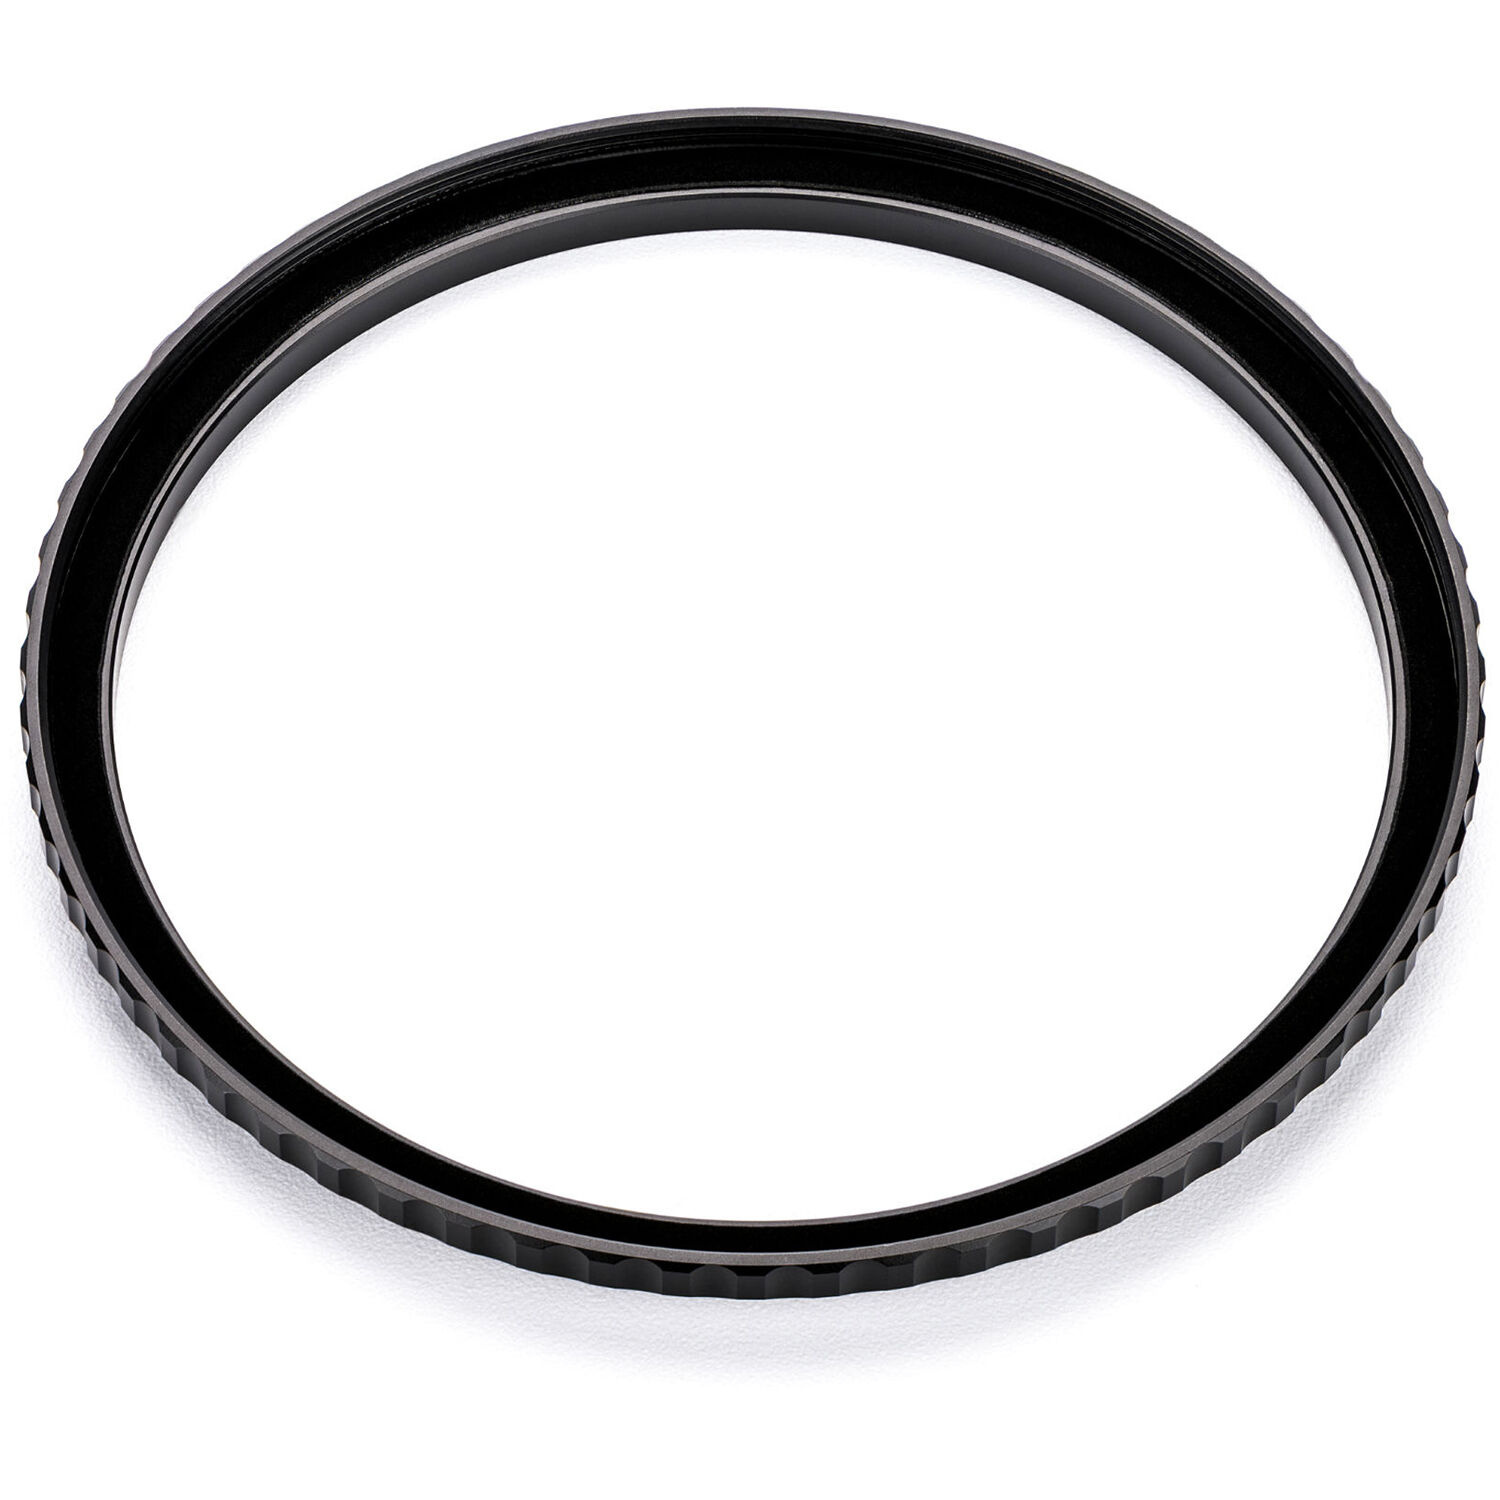 NiSi Brass Pro 52-77mm Step-Up Ring